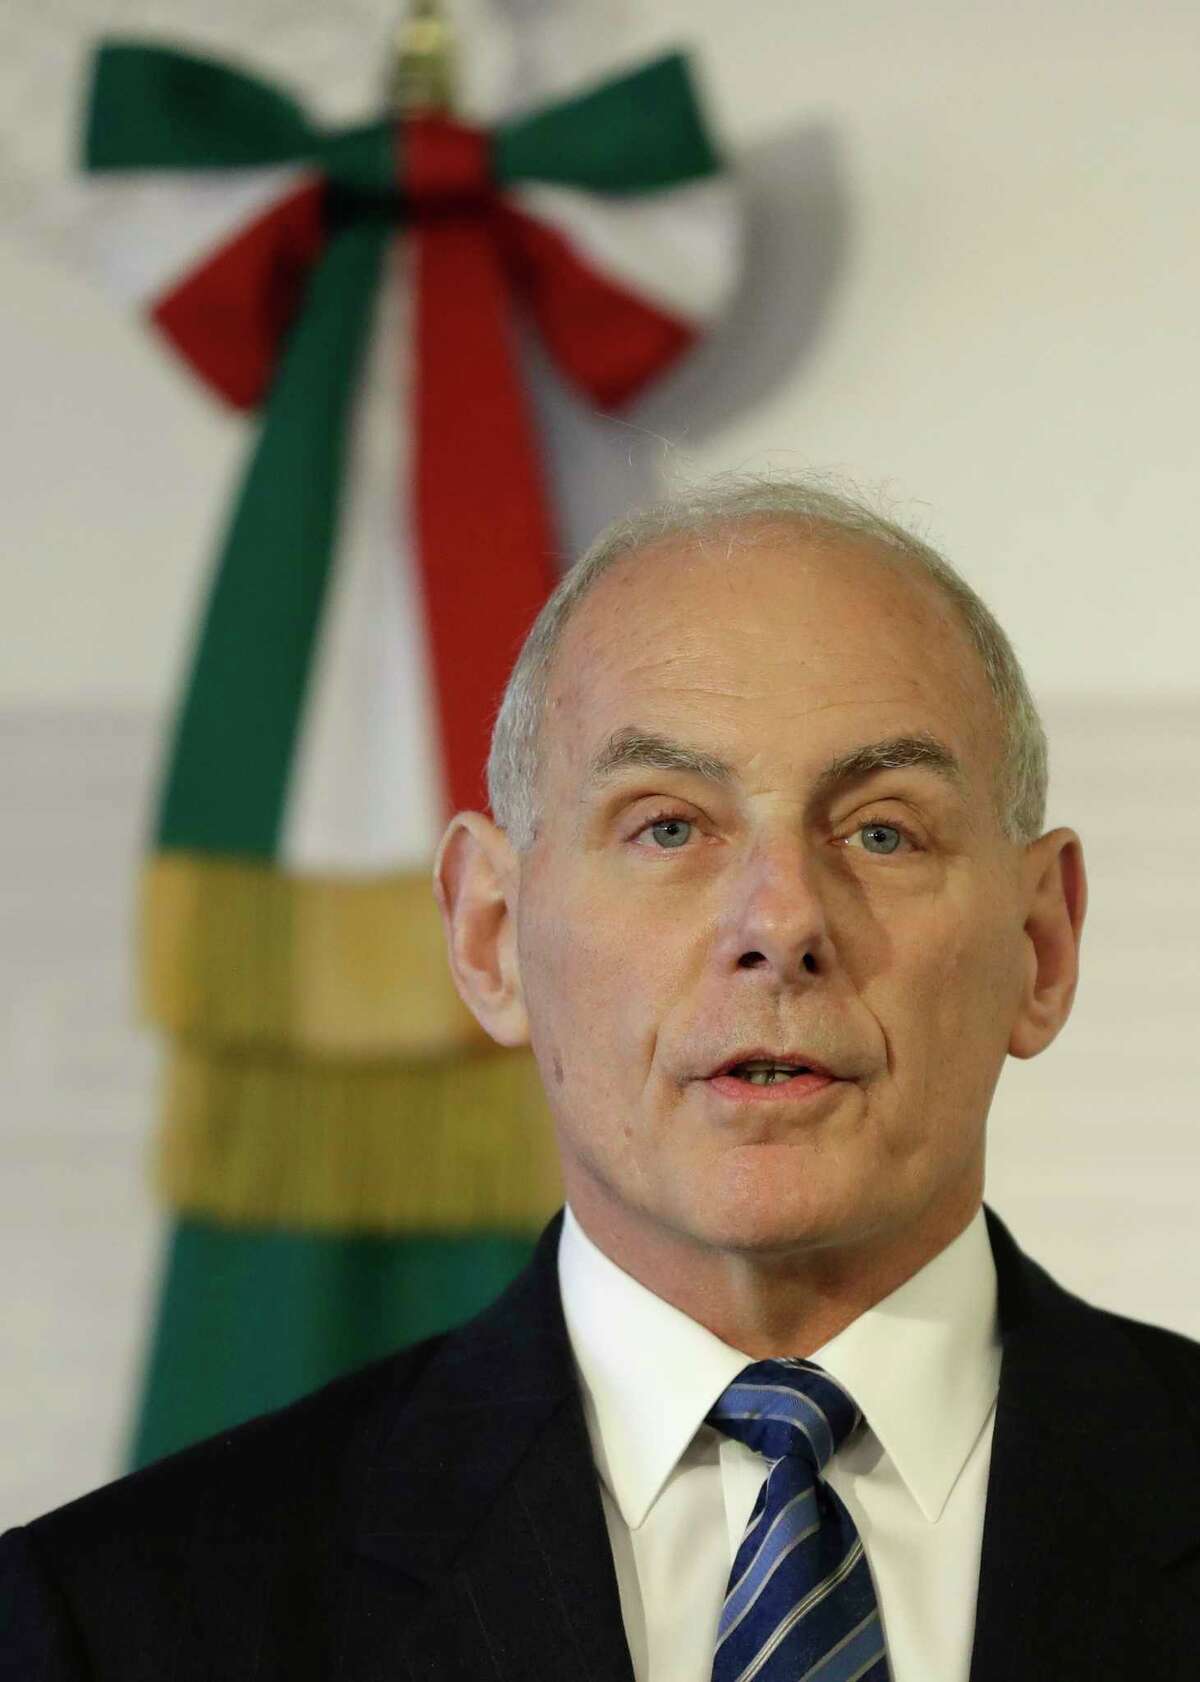 Homeland Security Secretary John Kelly speaks during a joint statement to the press by U.S. and Mexican officials at the Foreign Affairs Ministry in Mexico City, Thursday, Feb. 23, 2017. Mexico's mounting unease and resentment over President Donald Trump's immigration crackdown are looming over a Thursday meeting between Kelly, Secretary of State Rex Tillerson, and Mexican leaders that the U.S. had hoped would project a strong future for relations between neighbors. (AP Photo/Rebecca Blackwell)